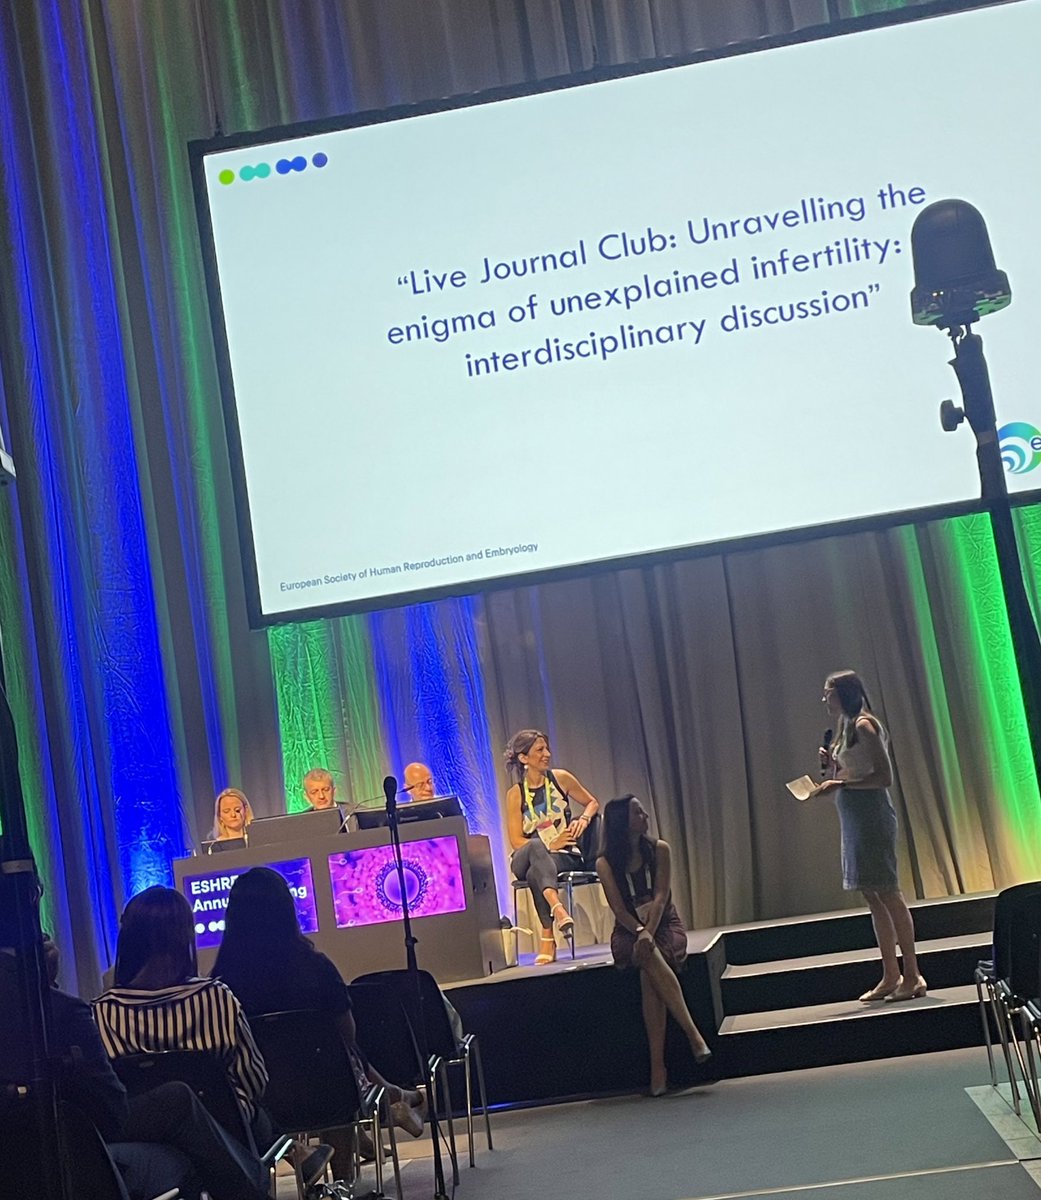 ✨Live #ESHREjc discussion about unexplained infertility is on fire! 🔥🔥
If you are not here yet, runnn. It’s at Hall D5. Don’t you miss it. #ESHRE2023